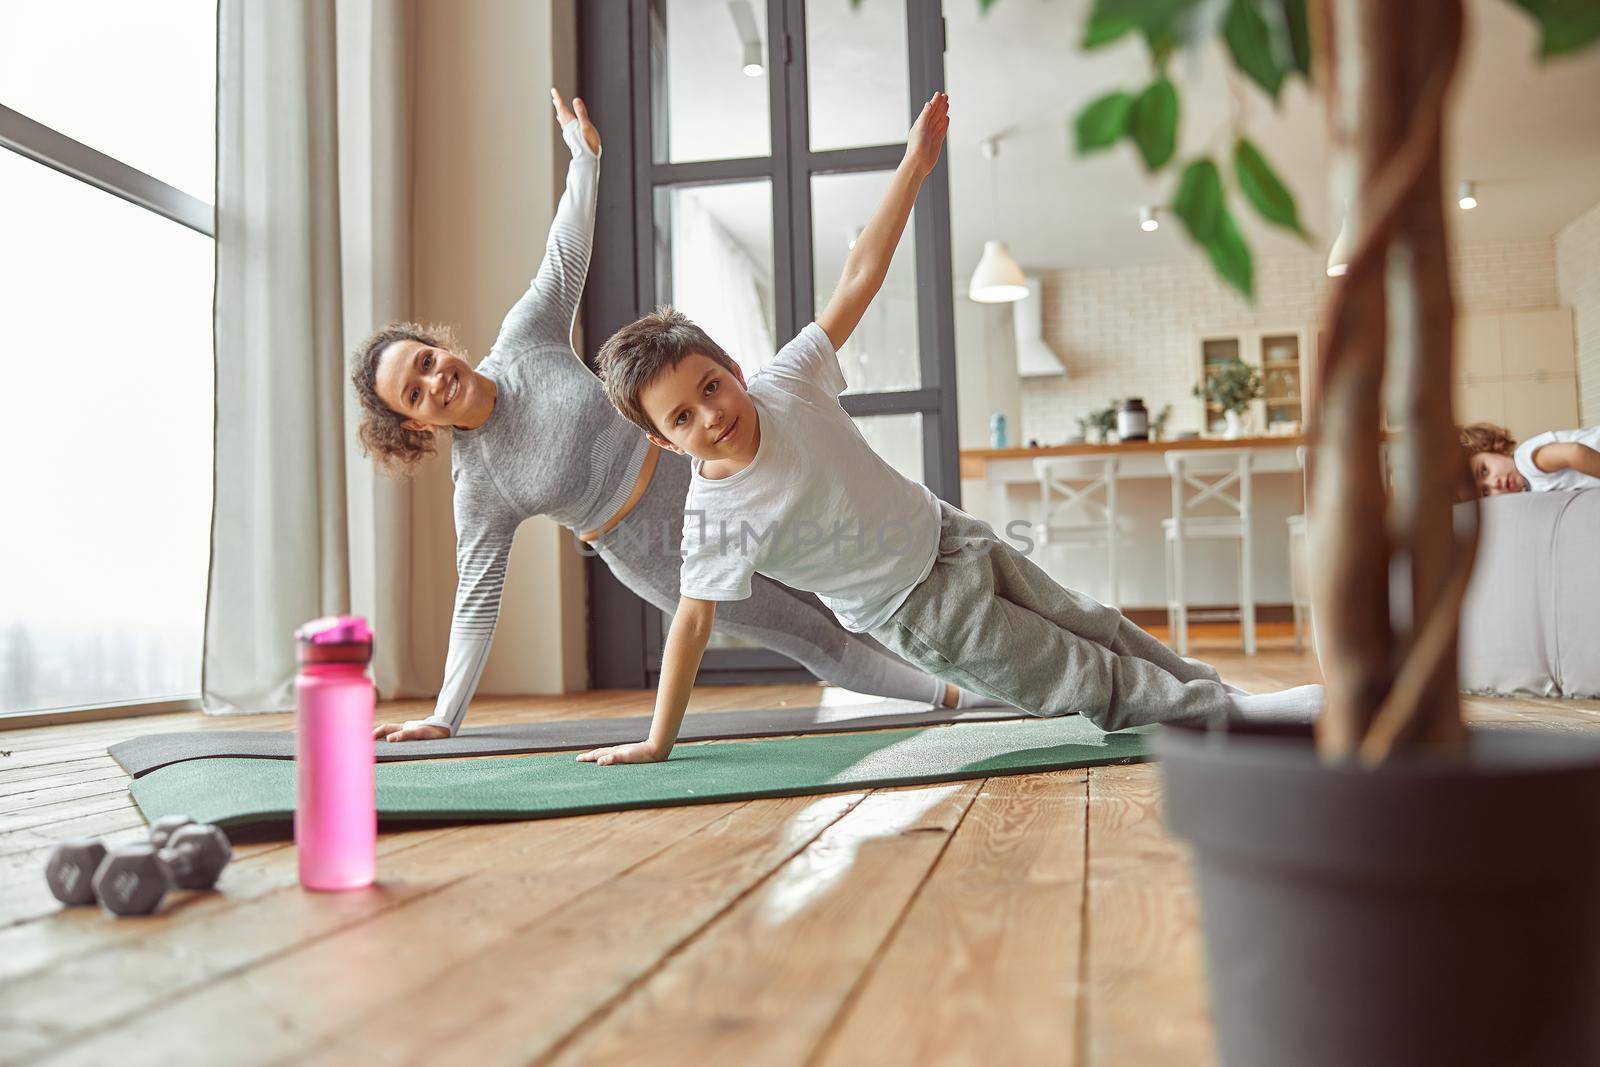 Full length portrait of happy woman doing side plank position with boy in living room